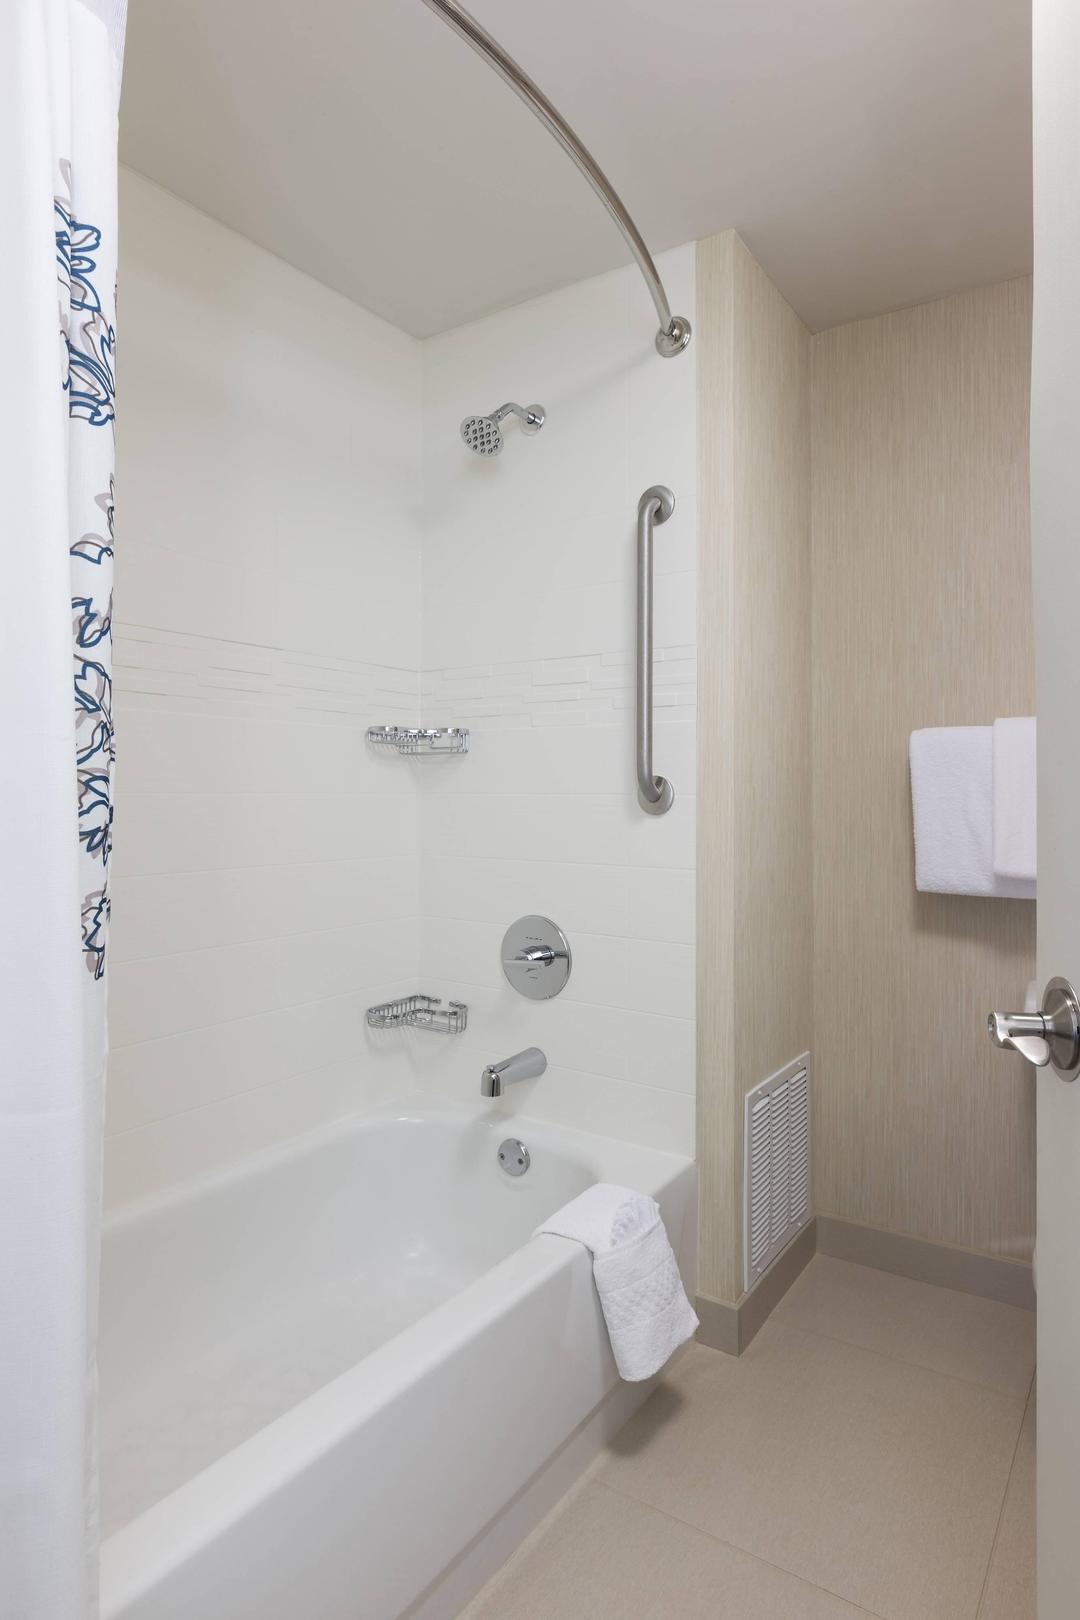 Our spacious bathrooms are adjacent to the bedrooms to bring ease to your stay.